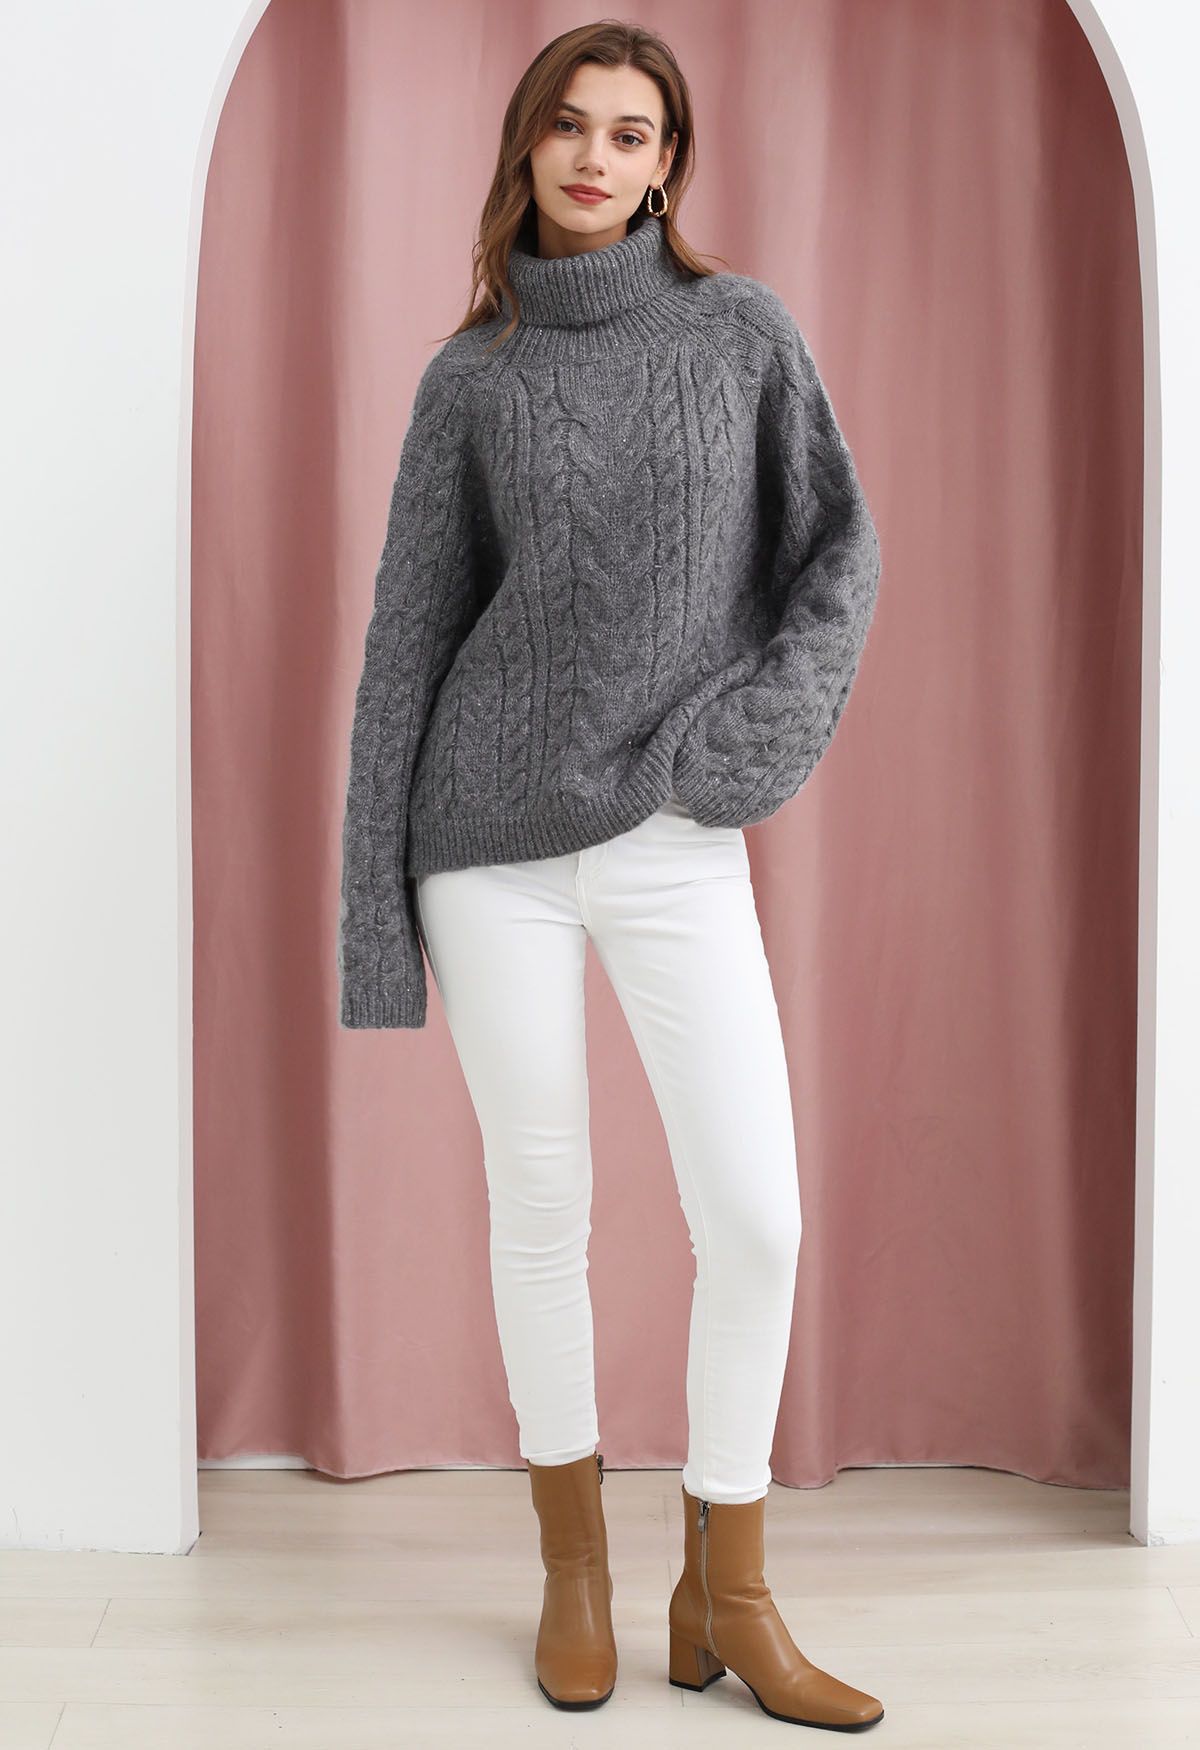 Turtleneck Sequin Cable Knit Sweater in Grey